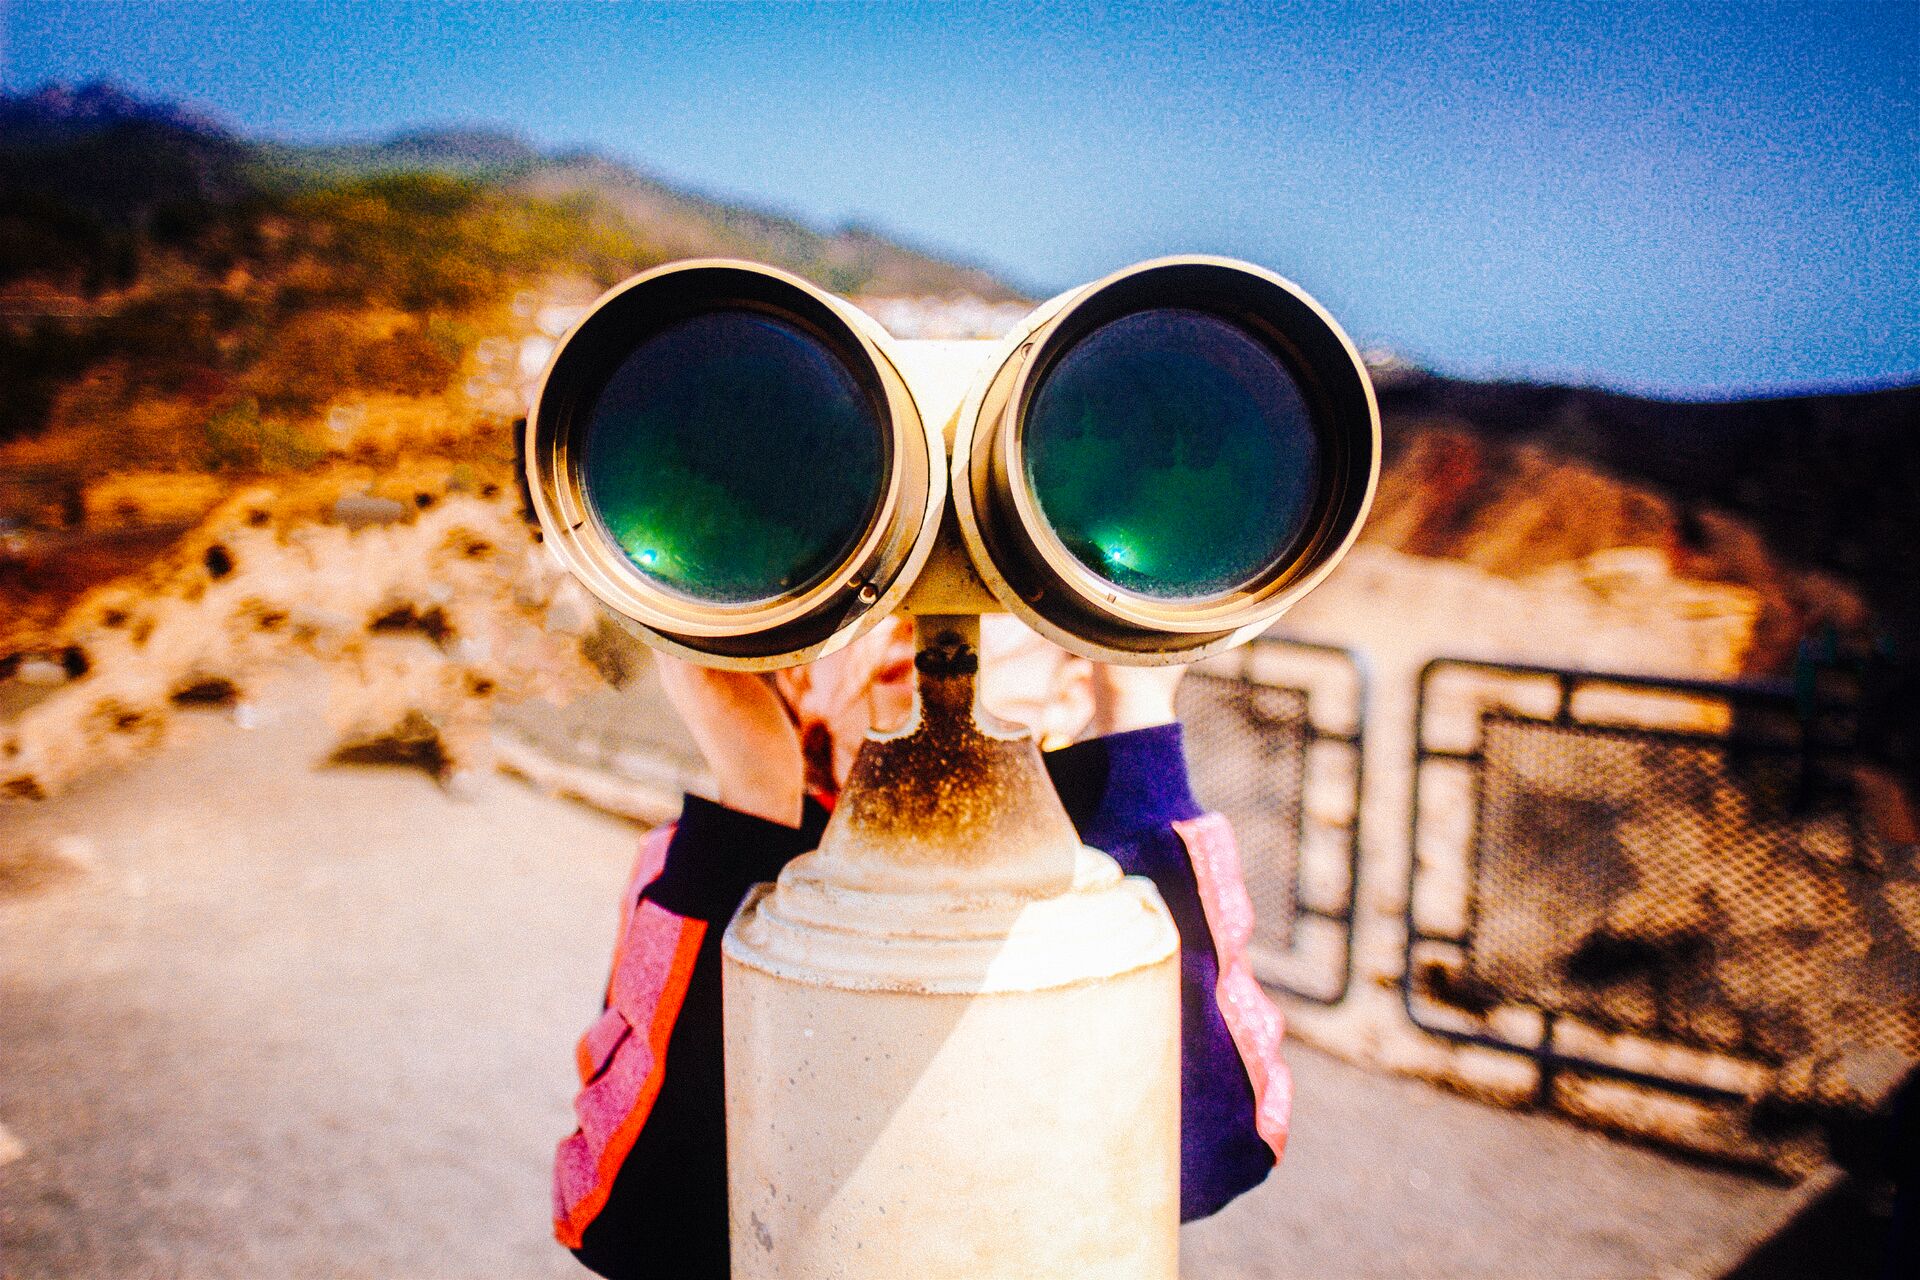 Large_MS PPT_Web-Close up of person looking through some binoculars outdoors .jpg